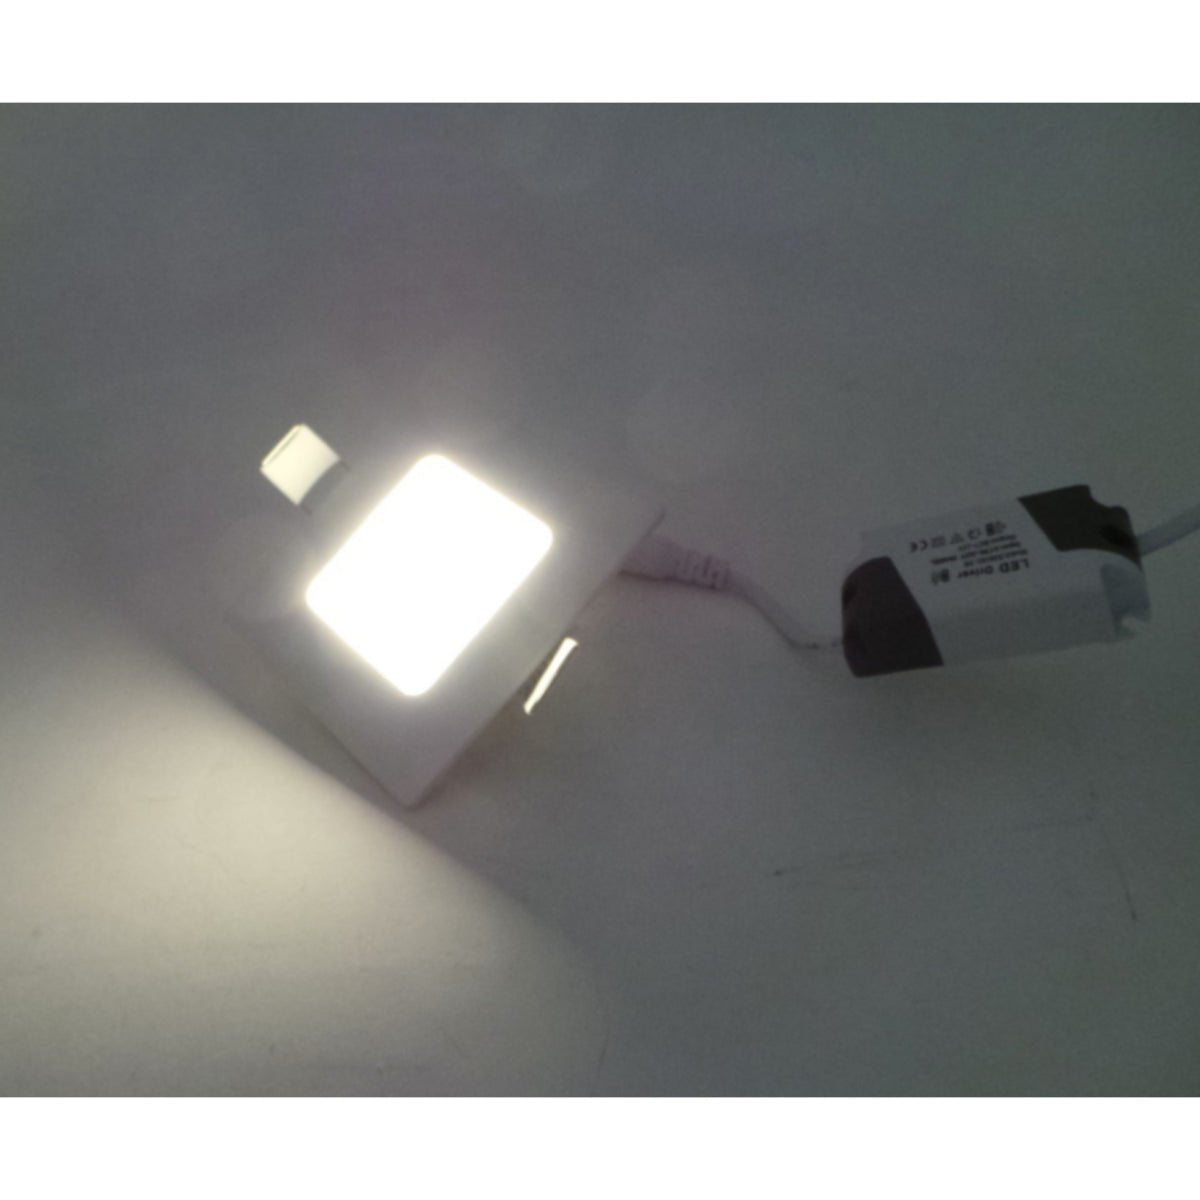 Downlight Dalle LED 3W 120° Extra Plate Carrée BLANC - Silumen